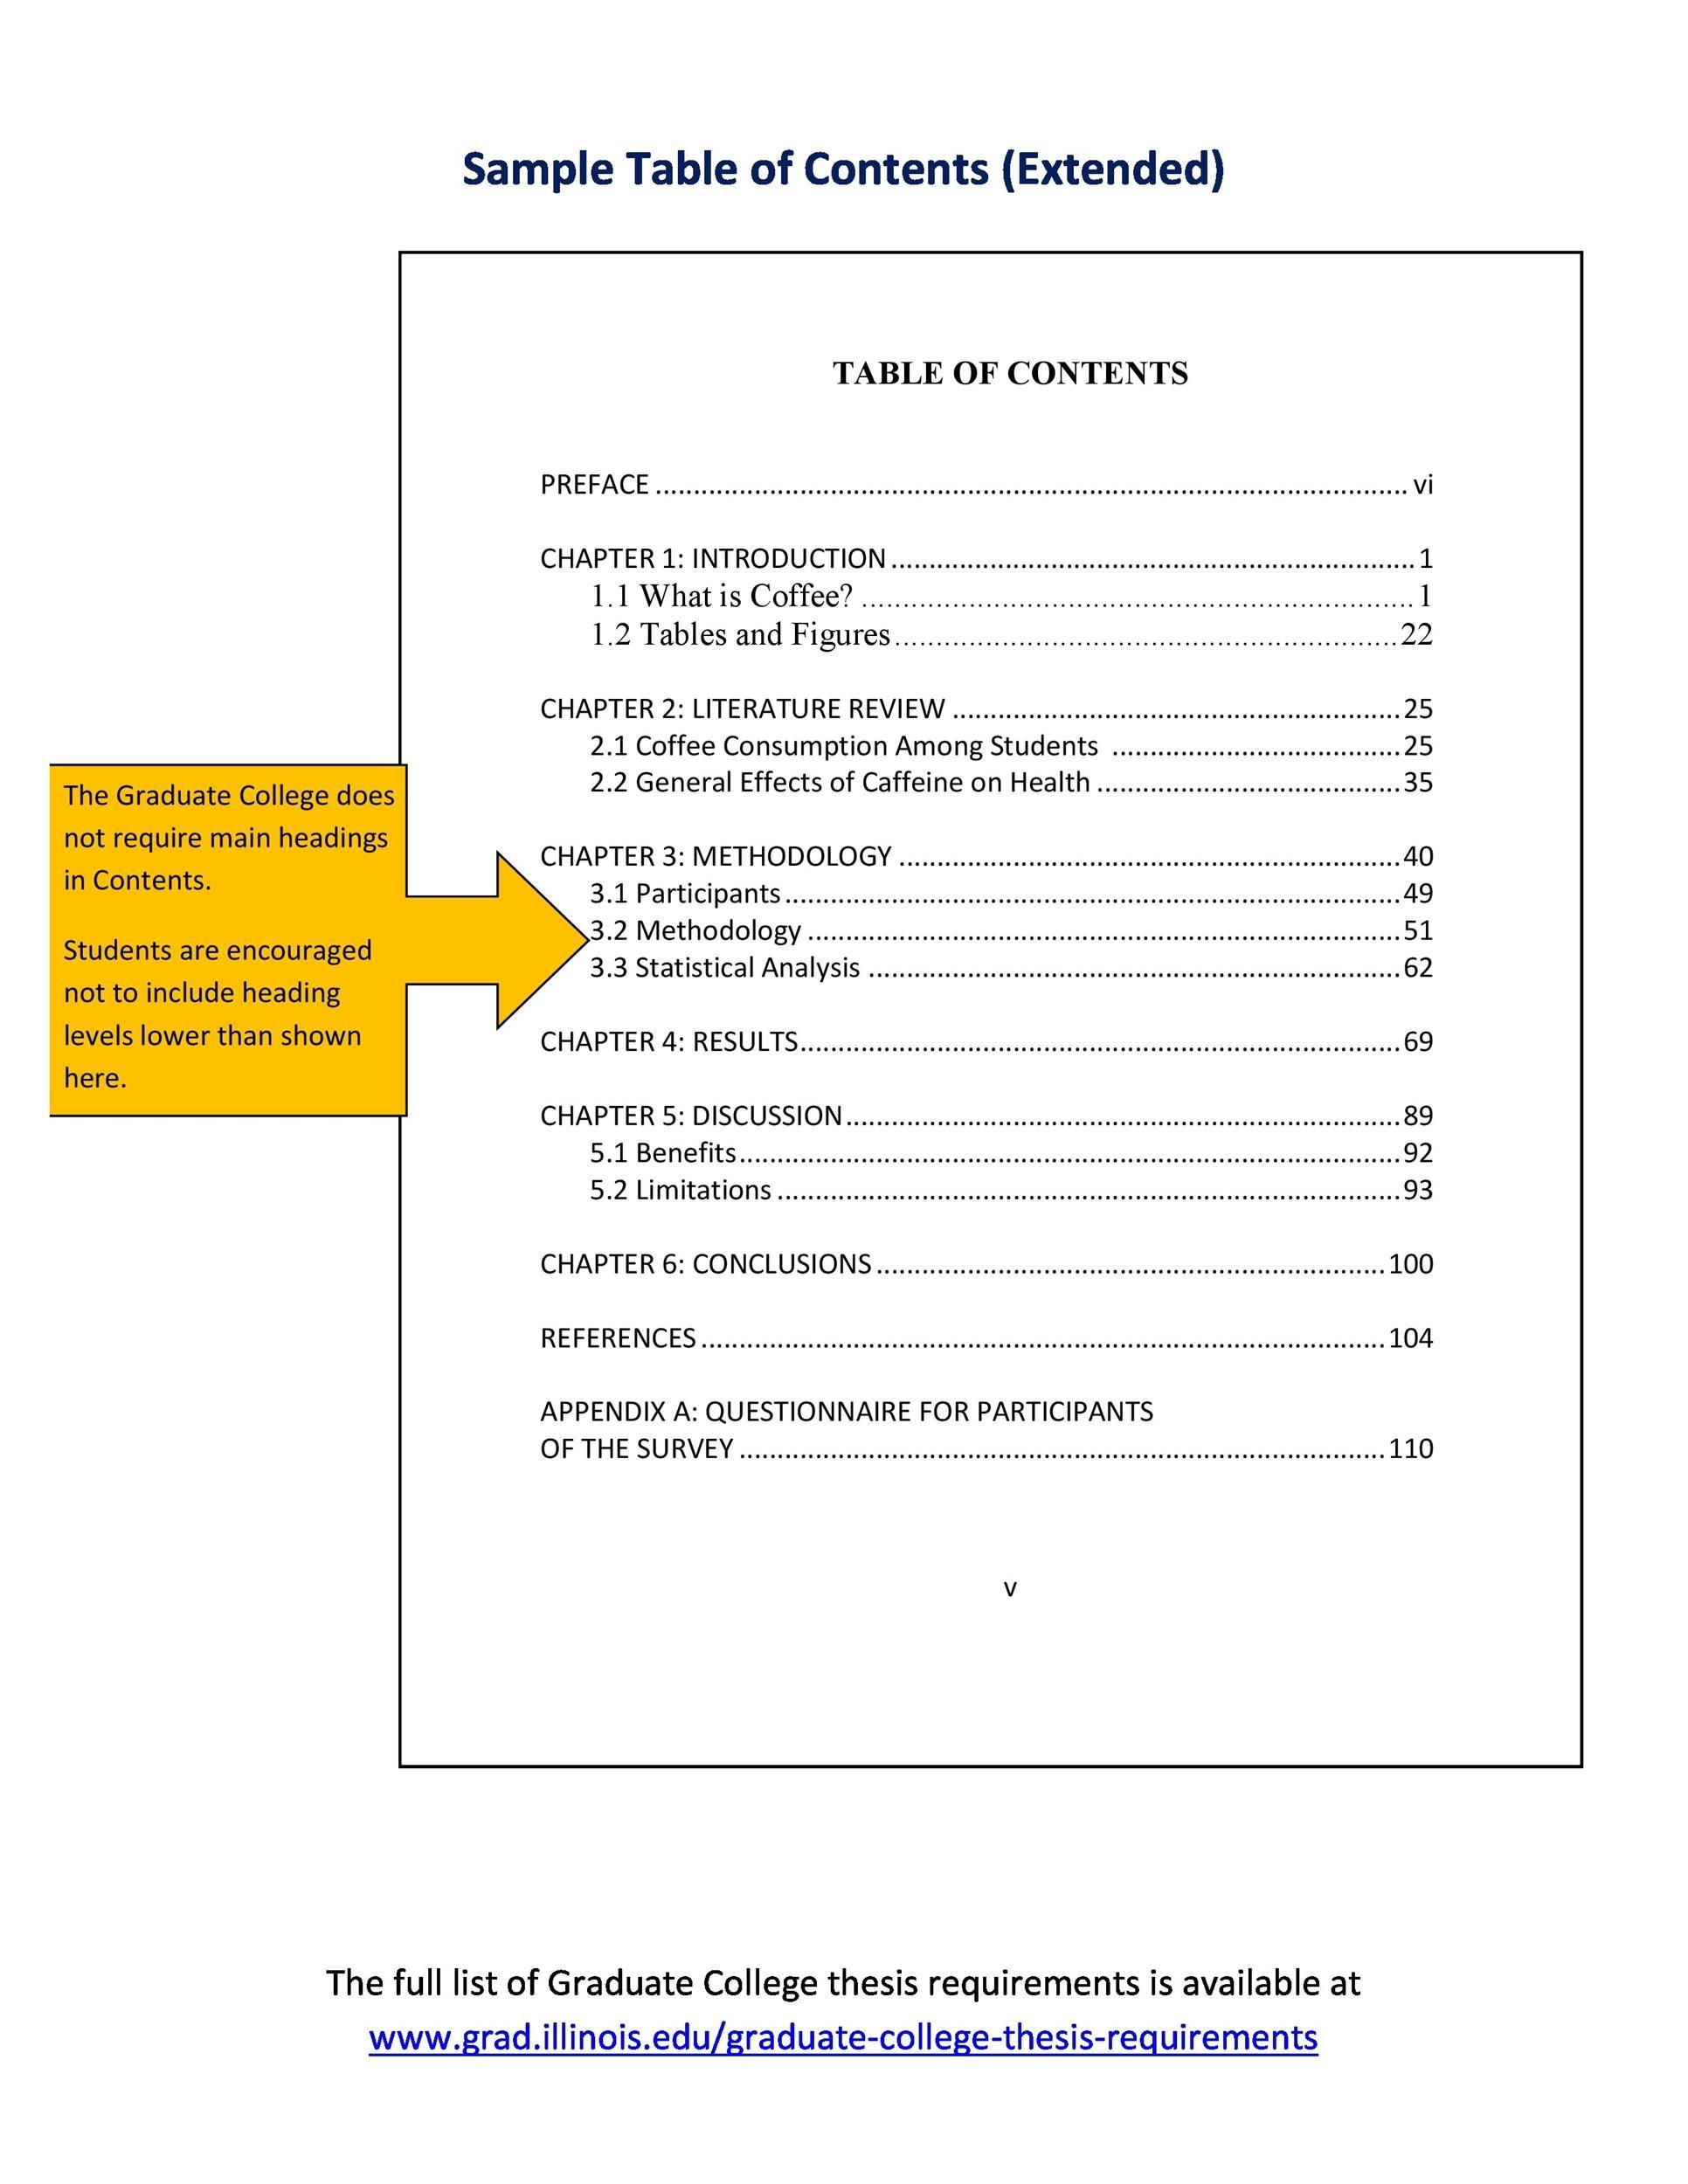 20 Table of Contents Templates and Examples ᐅ TemplateLab